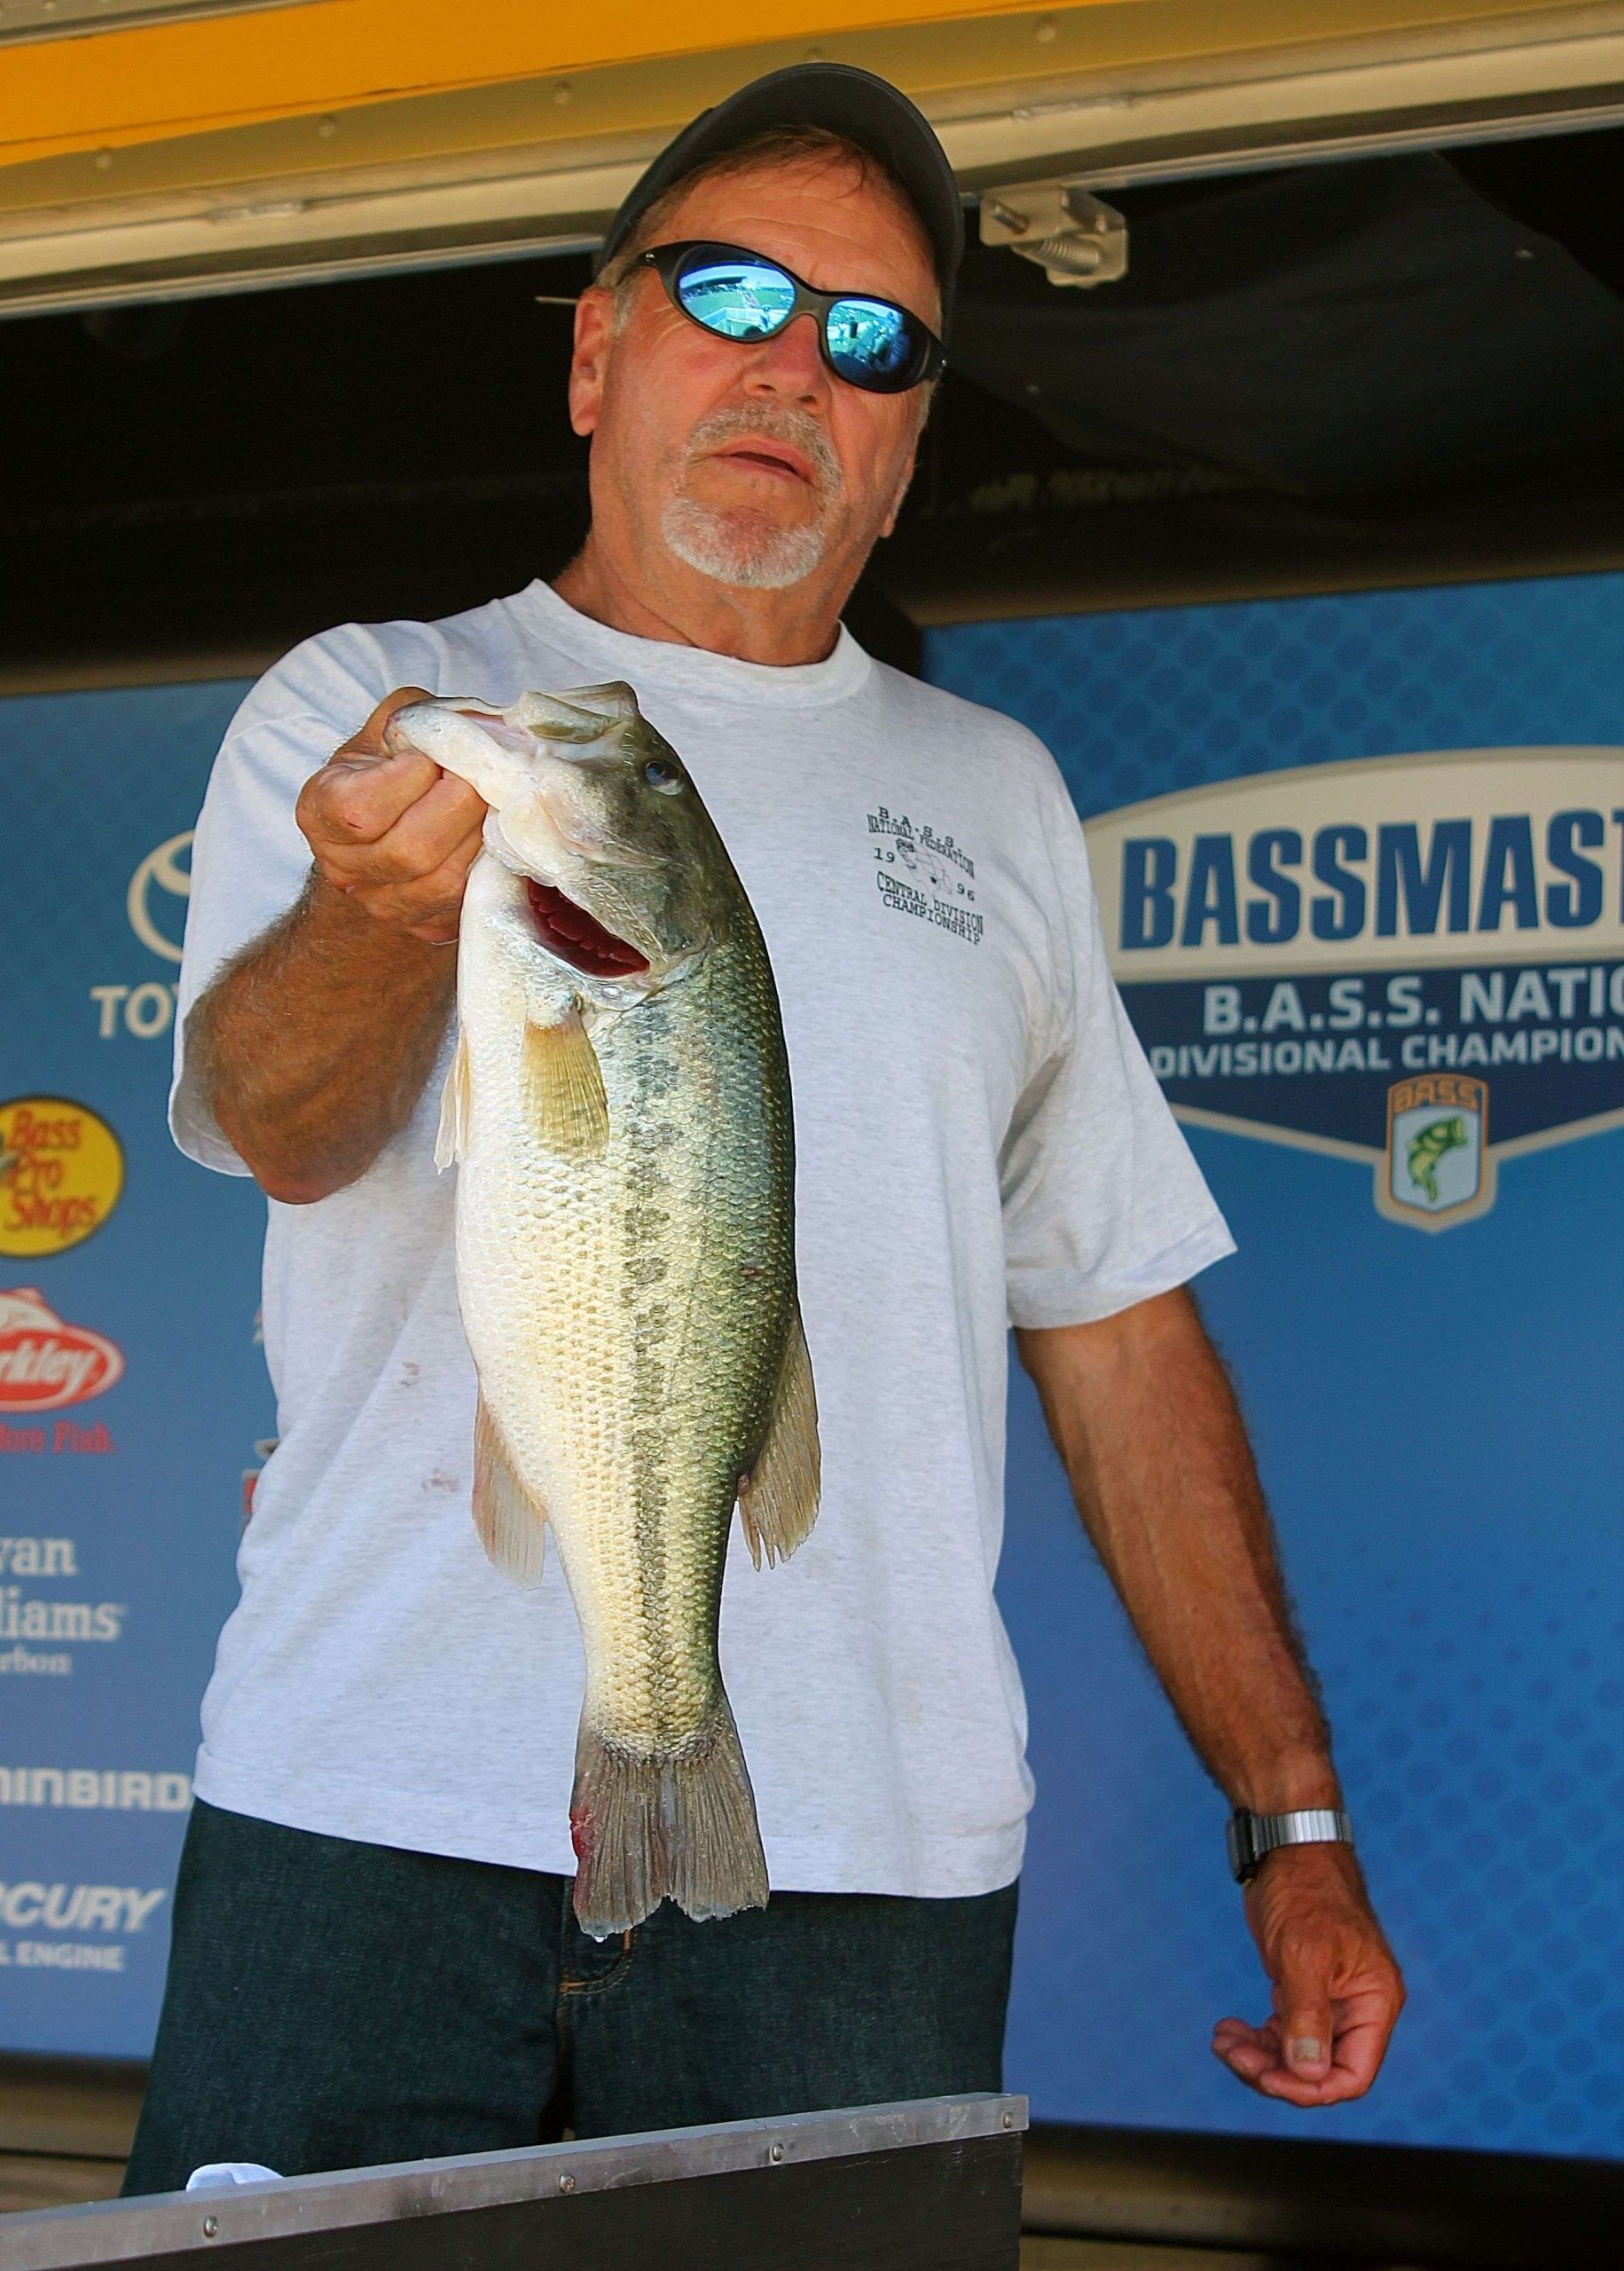 Lee Wubbels, in 11th place with 10-6, leads the Nebraska B.A.S.S. Nation team. Nebraska is in second place, with 29 bass for 71 pounds, 8 ounces.